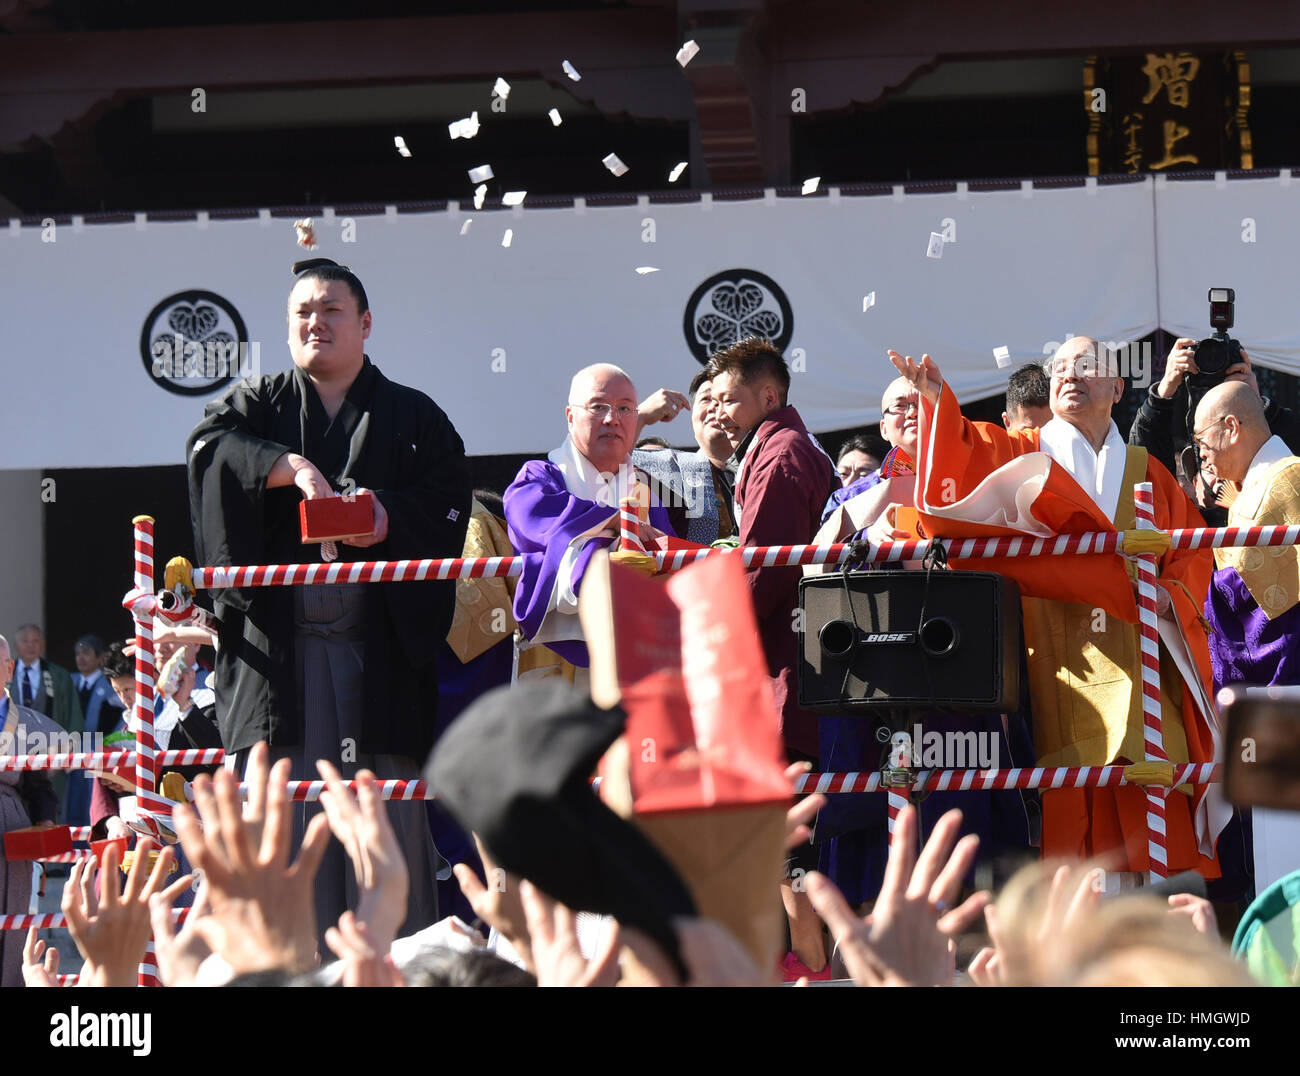 Tokyo, Japan. 3rd Feb, 2017. Sumo wrestlers and celebrities throw out lucky charms to a huge crowd in a traditional ritual celebrating the arrival of spring at Tokyos Zojoji Buddhist temple on Friday, February 3, 2017. Credit: Natsuki Sakai/AFLO/Alamy Live News Stock Photo